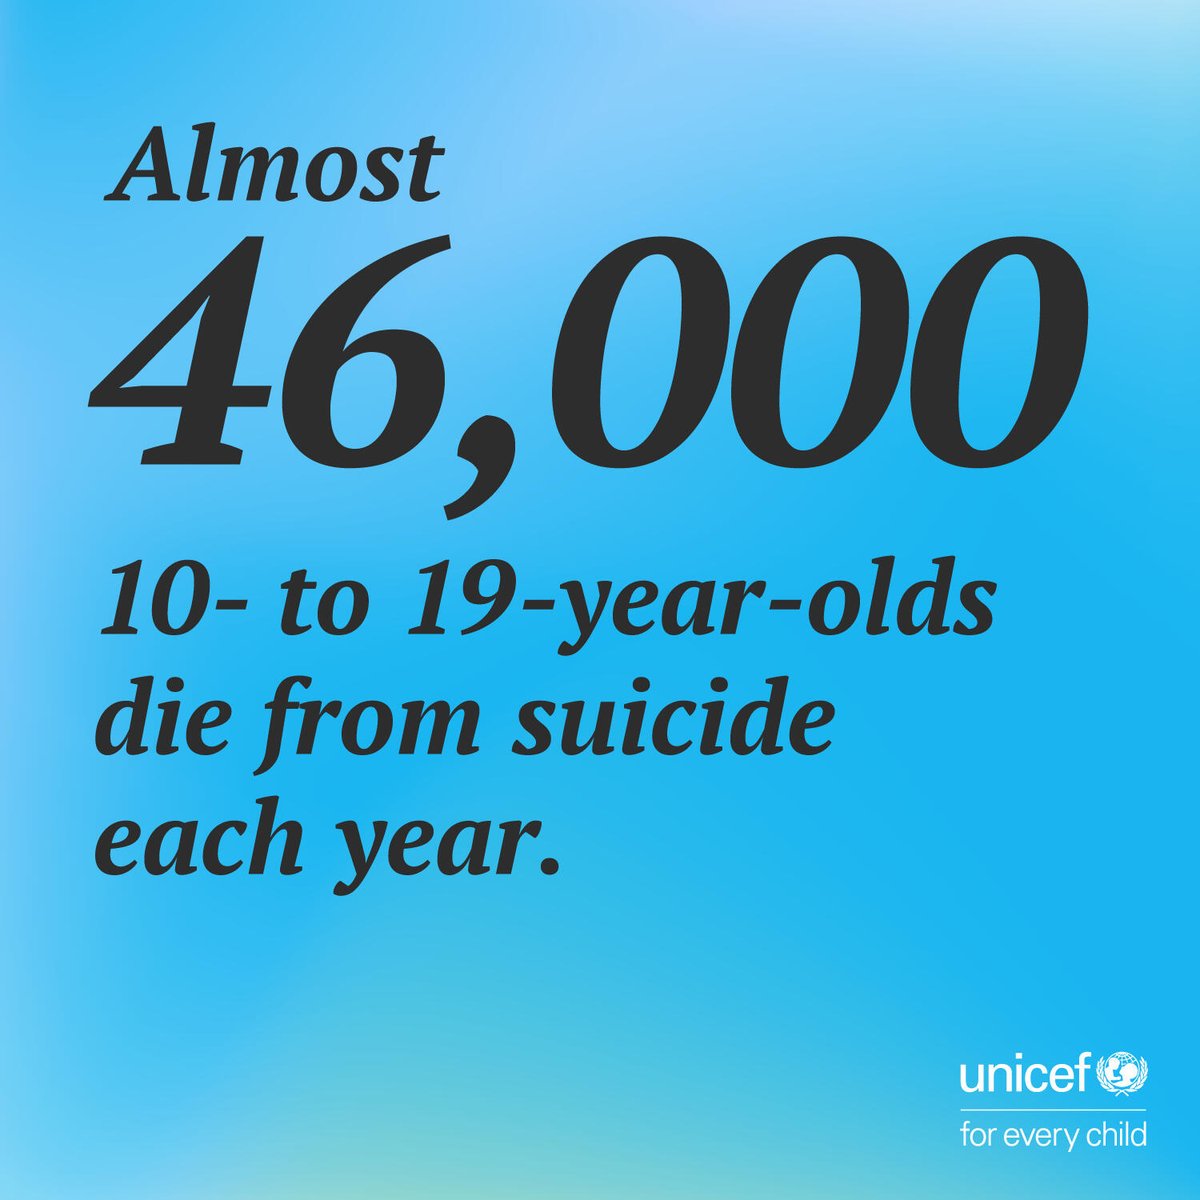 #WorldMentalHealthDay
#RethinkEducation #StopBullying
#StopExploitation #IncreaseMHNurses
#InvestInCAMHS #NoWrongDoor
Let's make some changes and reduce this ghastly number of deaths. No child should feel so sad, so hopeless, that death is the only answer for them. #BeThechange